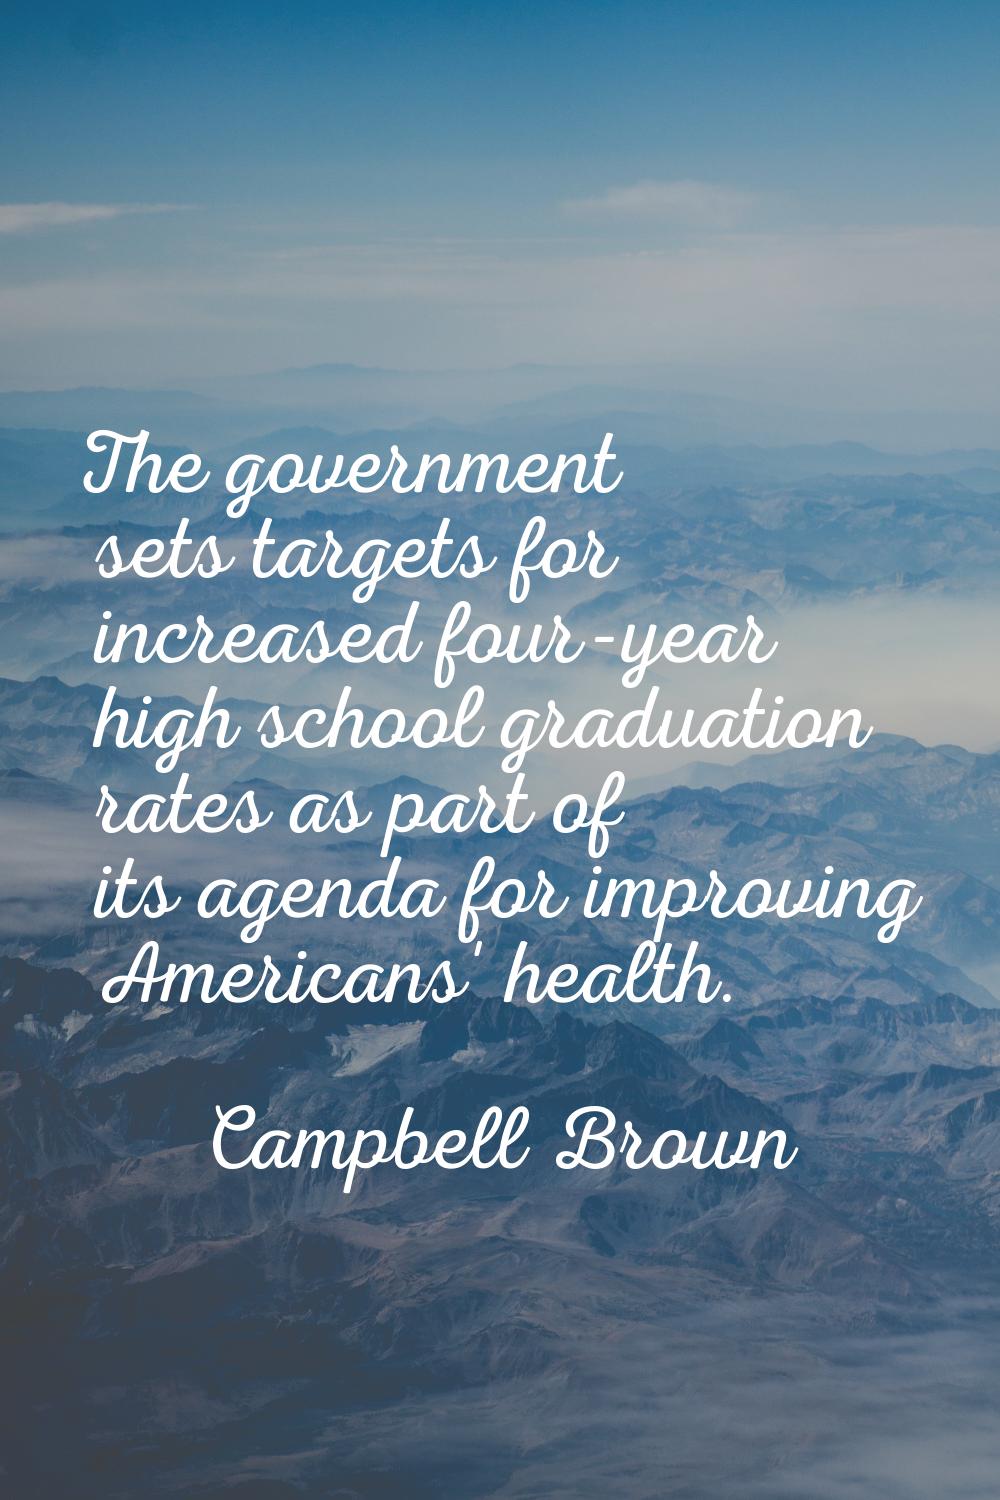 The government sets targets for increased four-year high school graduation rates as part of its age